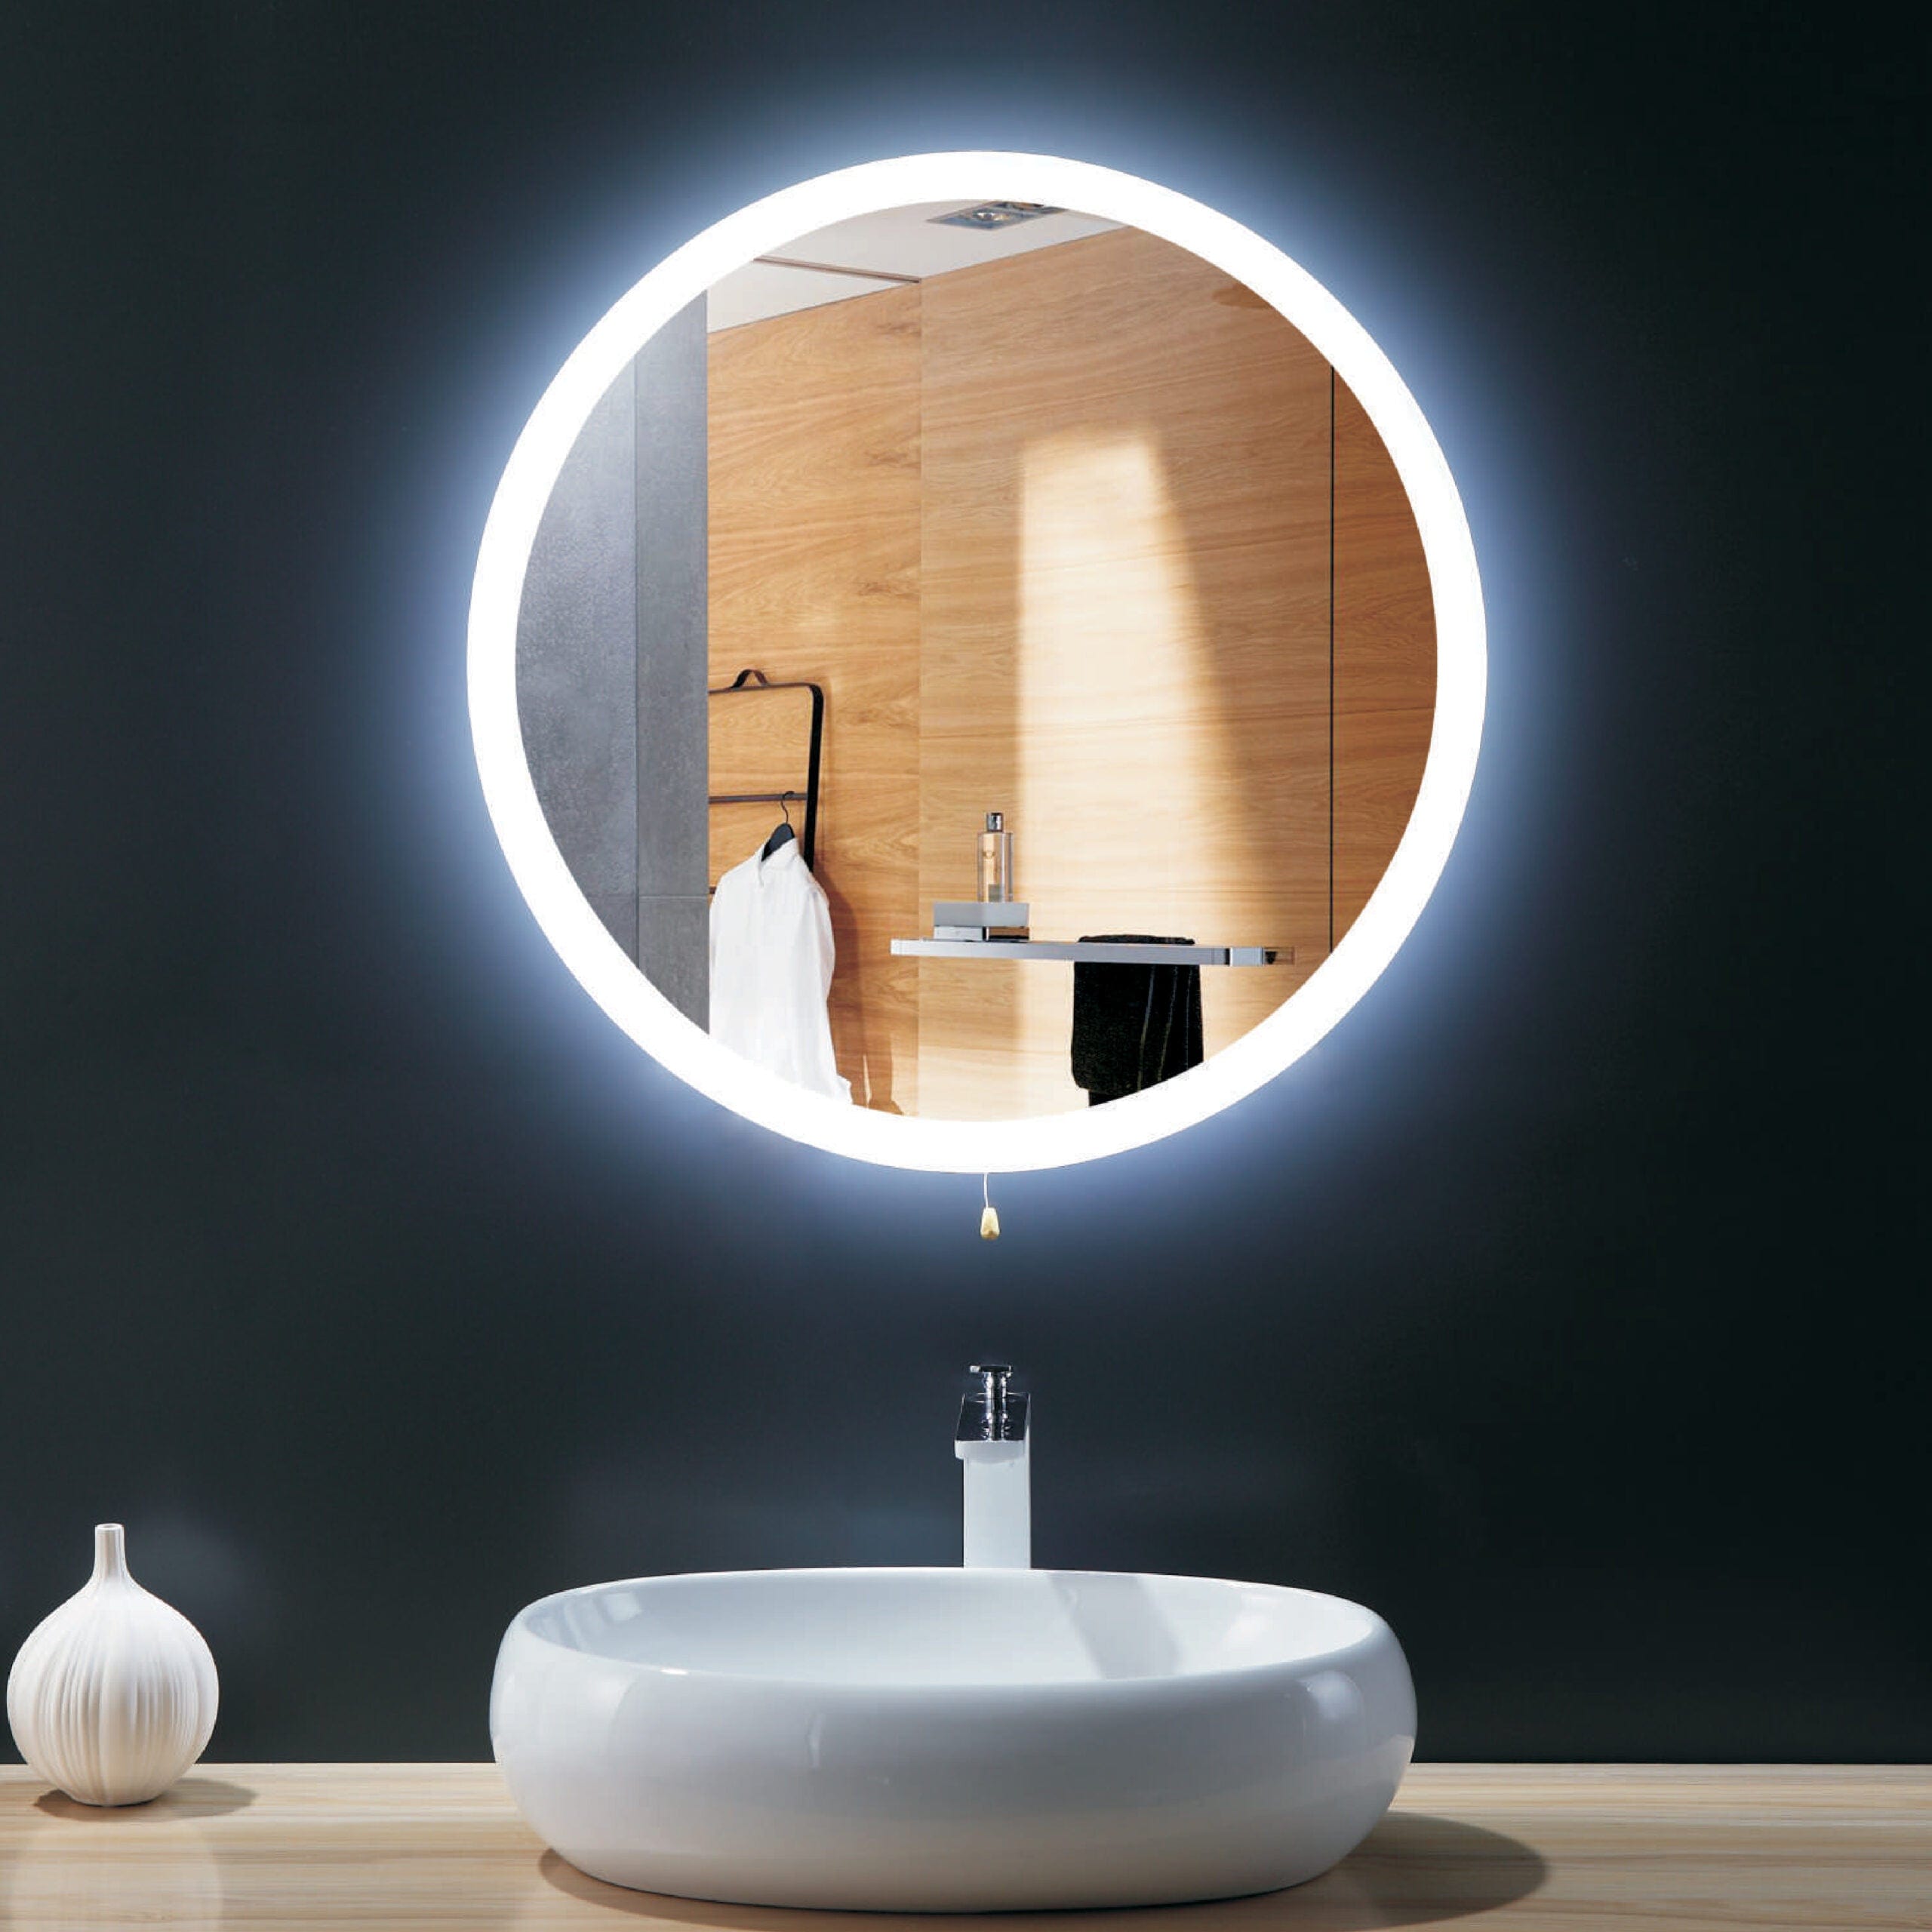 24" Round LED Bathroom Mirror with Steel Frame & Touch Button - CL065-1 | Supply Master | Accra, Ghana Shower Caddy & Mirror Buy Tools hardware Building materials